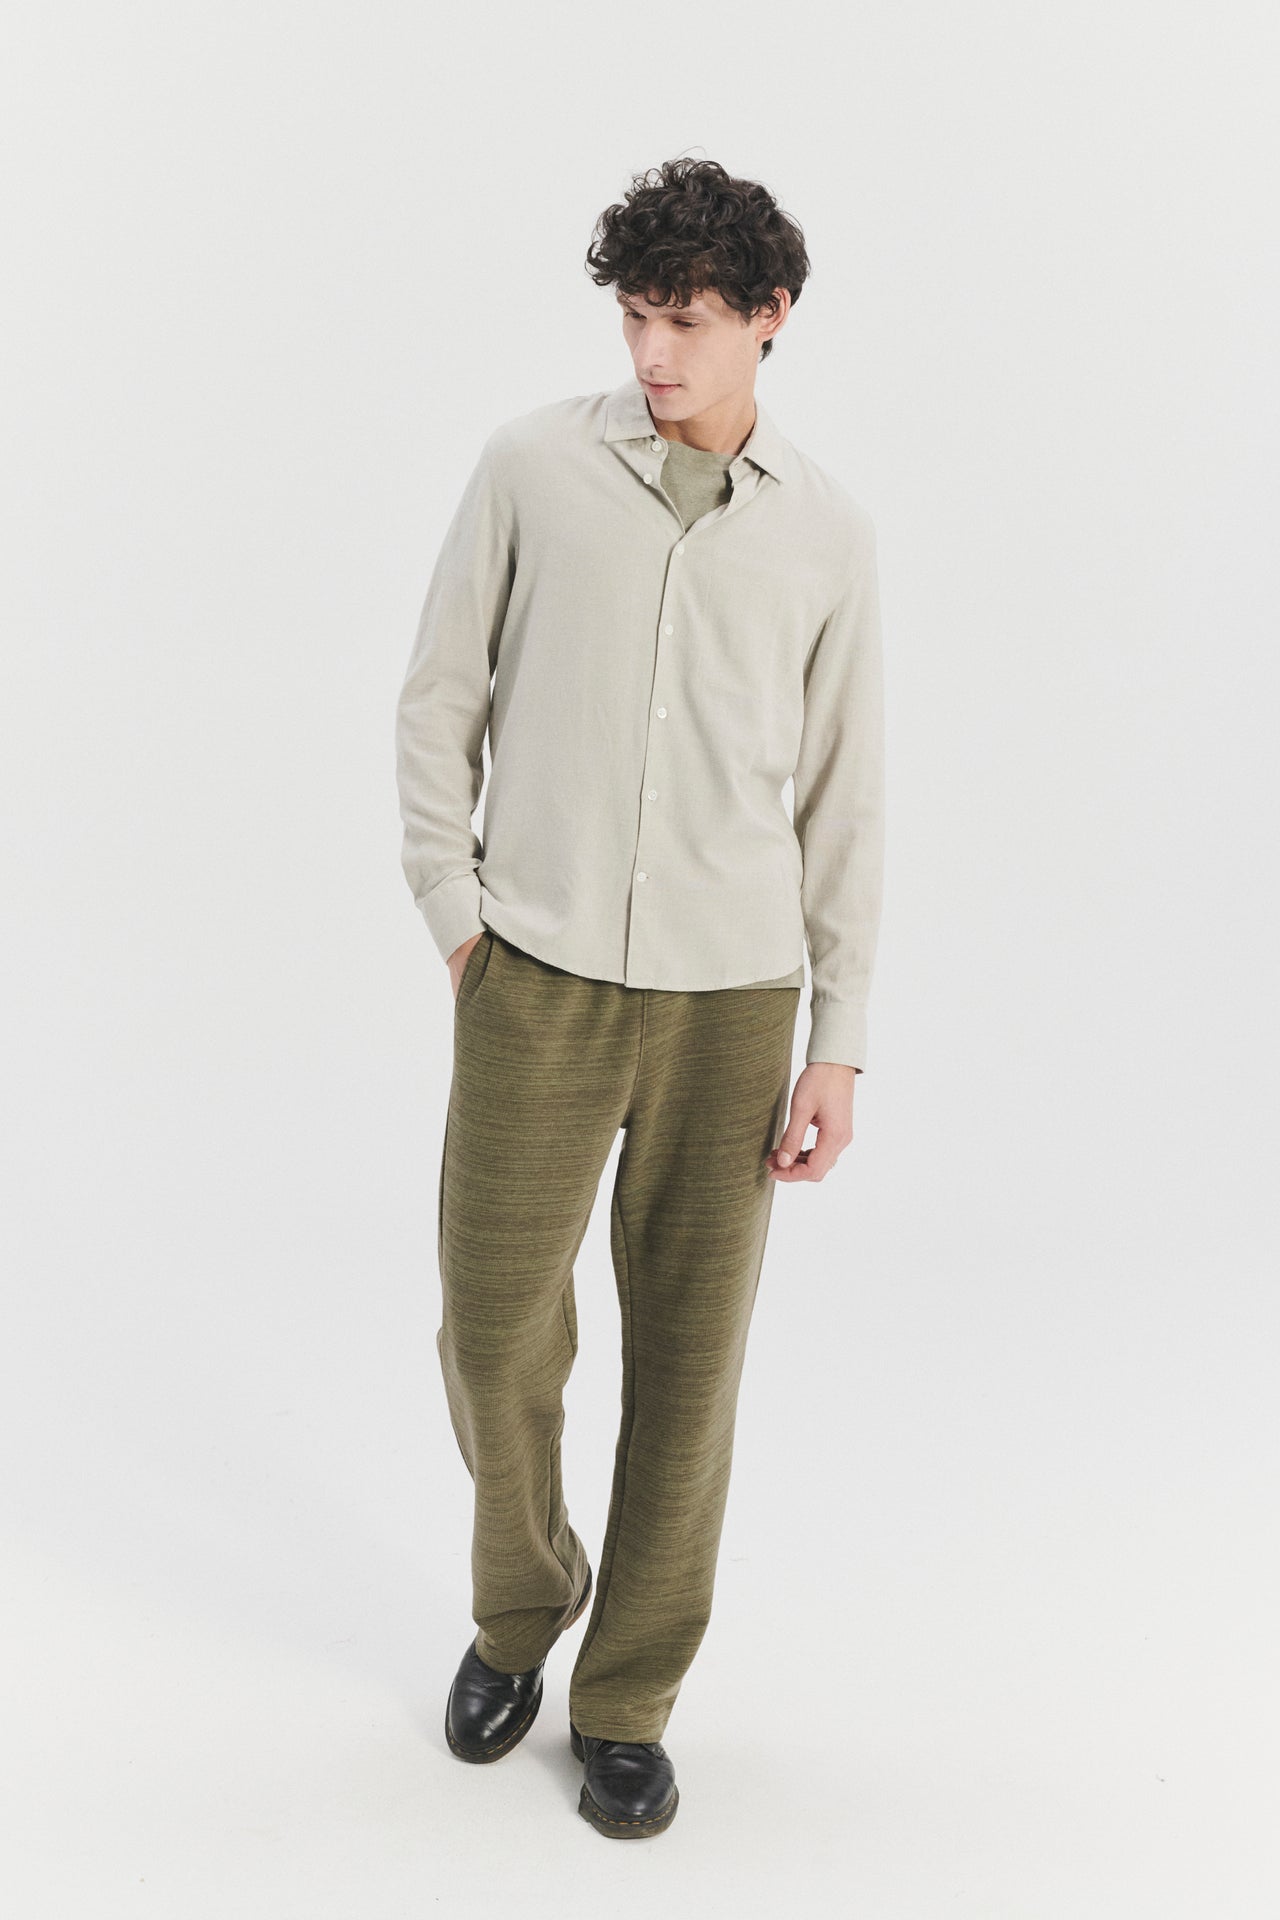 Feel Good Shirt in a Sky Grey Airy Mix of Portuguese Merino Wool and Modal